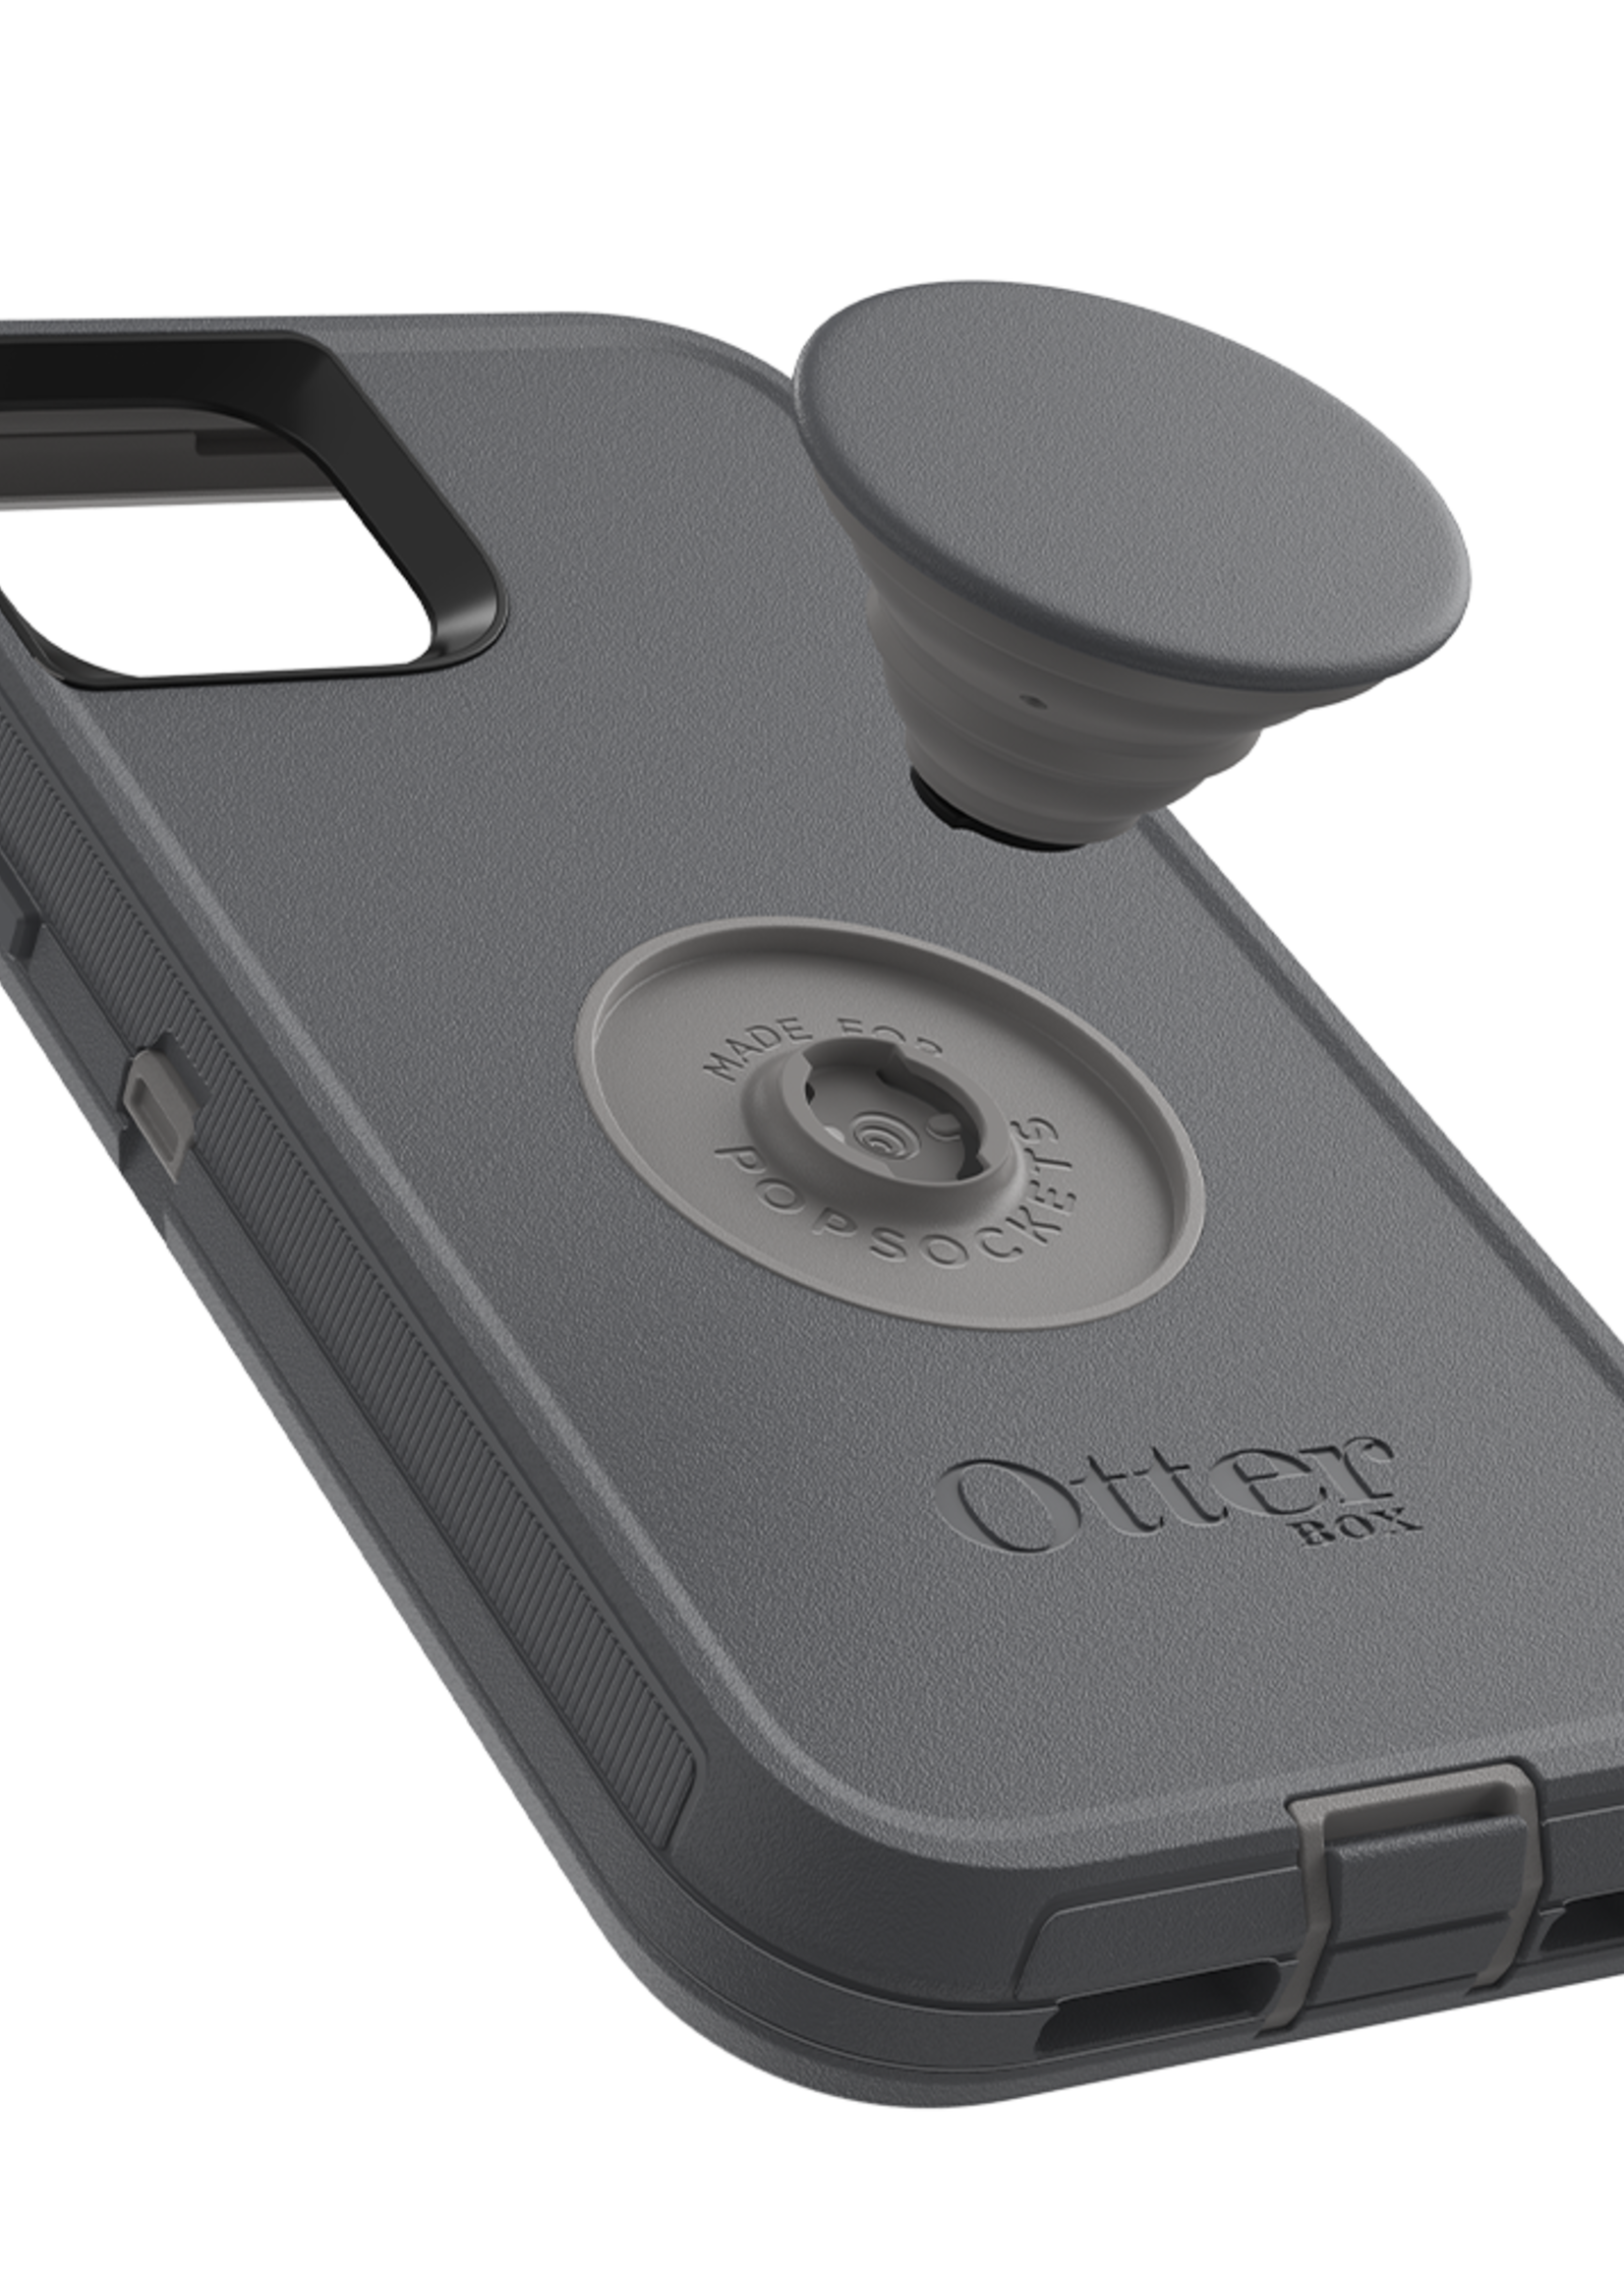 Otterbox OtterBox - Otter + Pop Defender Case with PopGrip for Apple iPhone 11 Pro - Howler